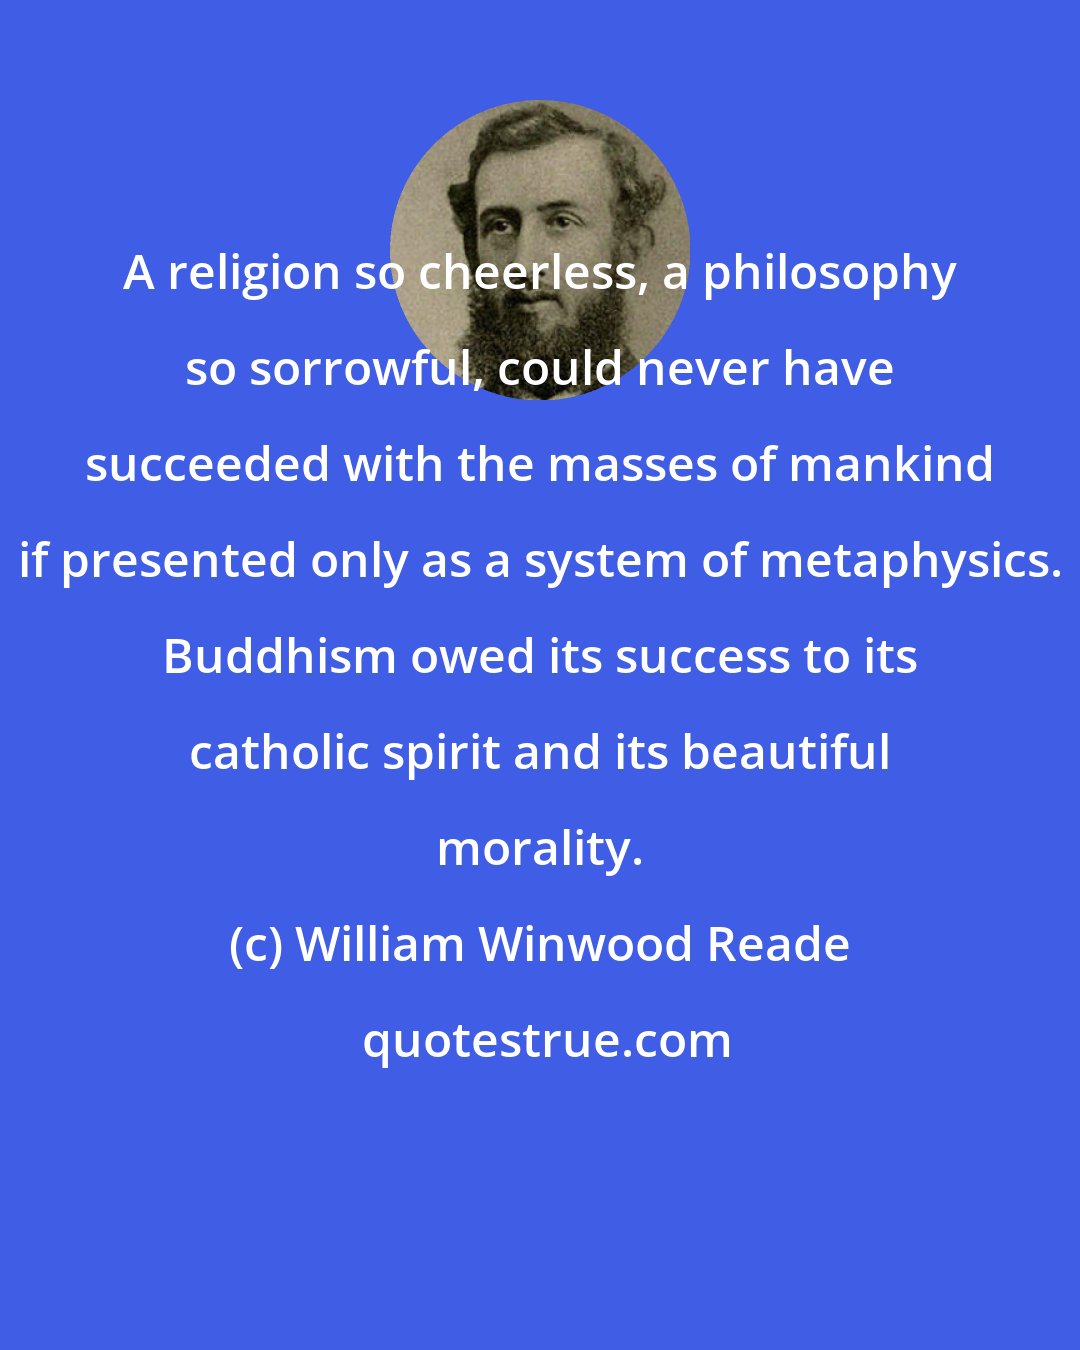 William Winwood Reade: A religion so cheerless, a philosophy so sorrowful, could never have succeeded with the masses of mankind if presented only as a system of metaphysics. Buddhism owed its success to its catholic spirit and its beautiful morality.